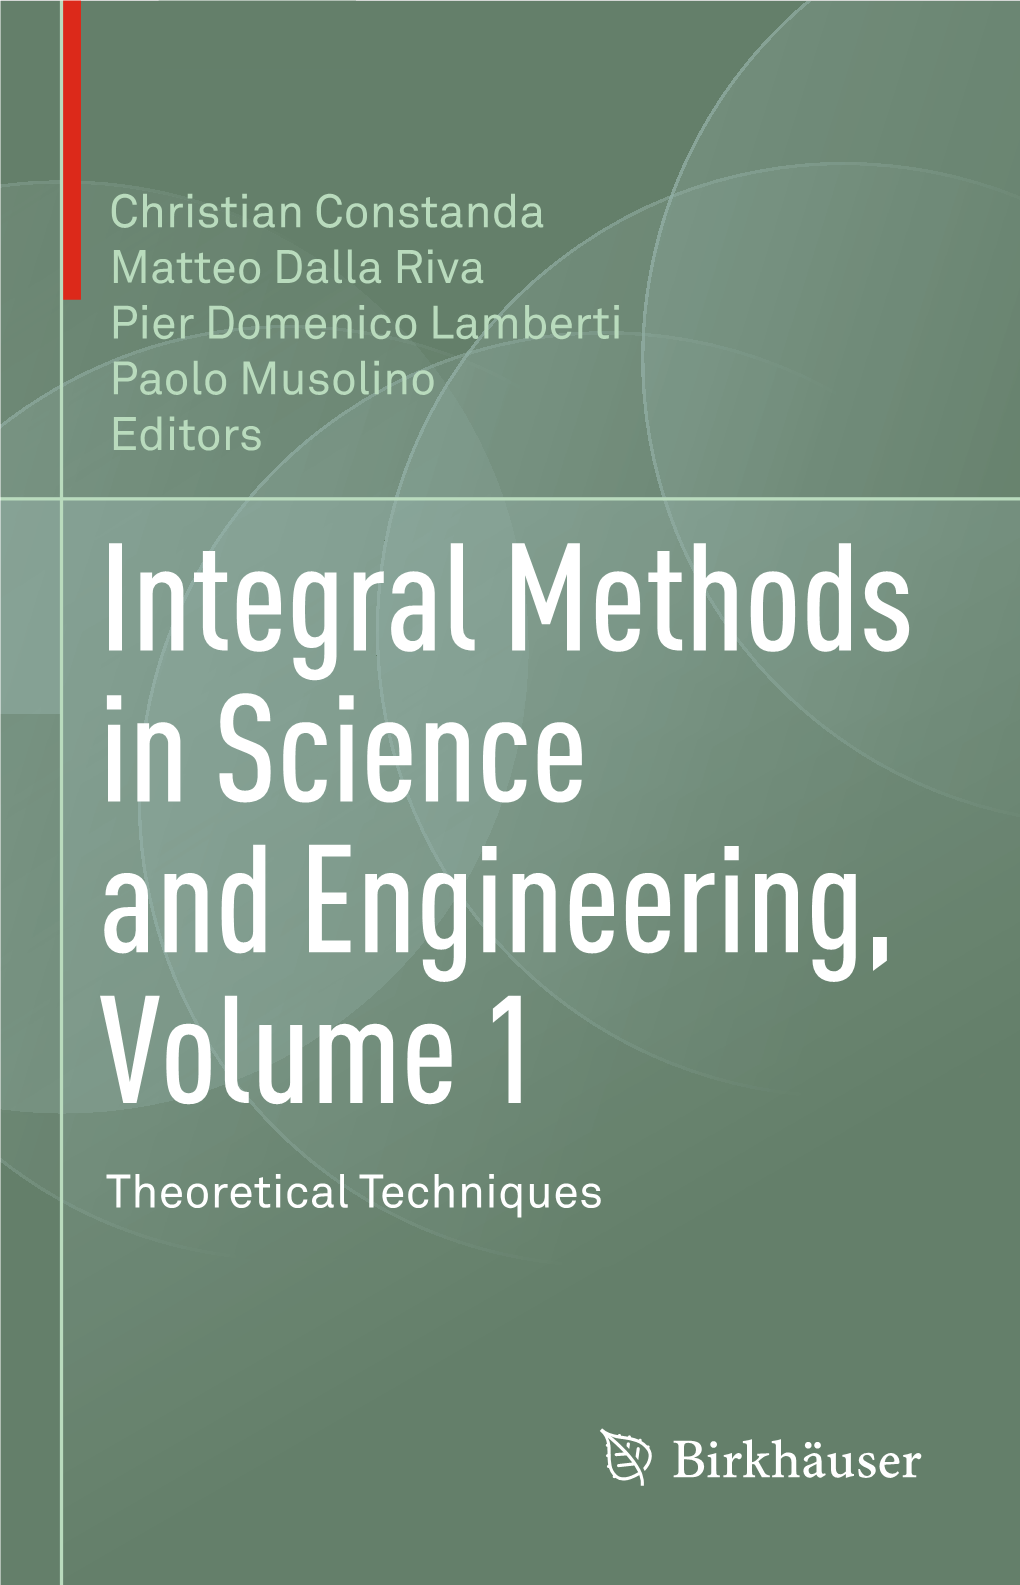 Integral Methods in Science and Engineering, Volume 1 Theoretical Techniques